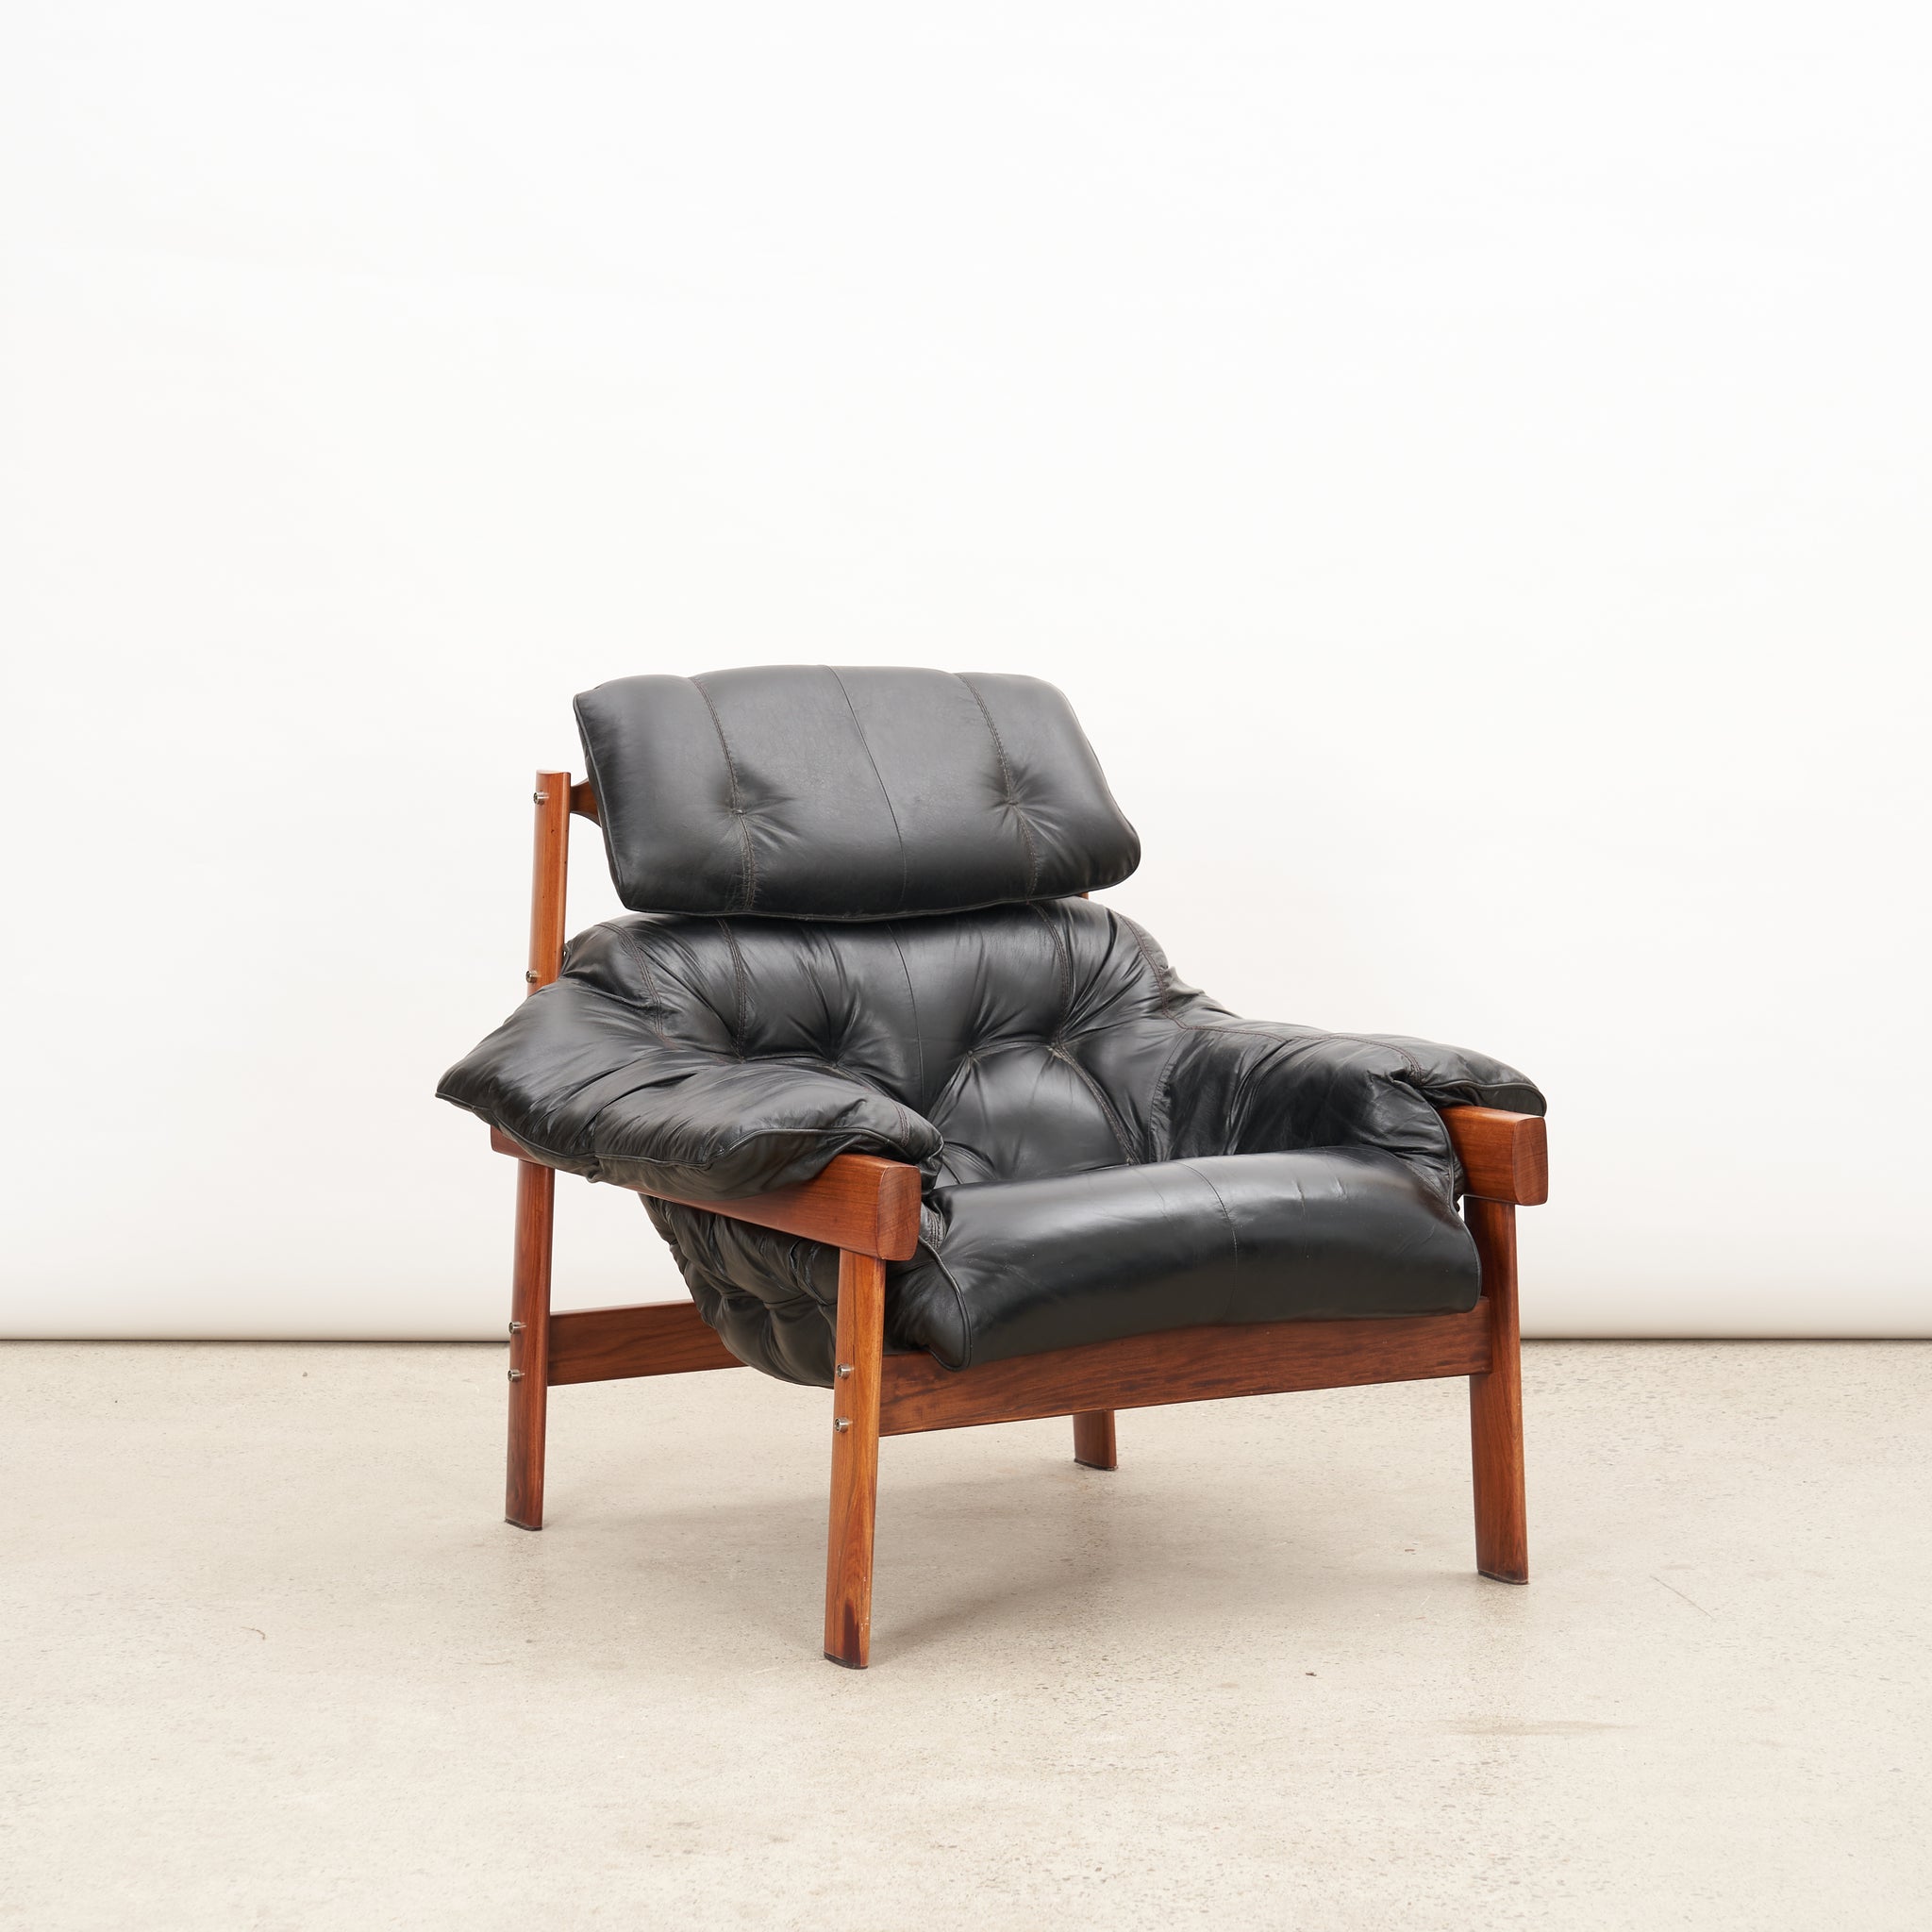 Brazilian Rosewood & Leather Lounge Chair by Percival Lafer